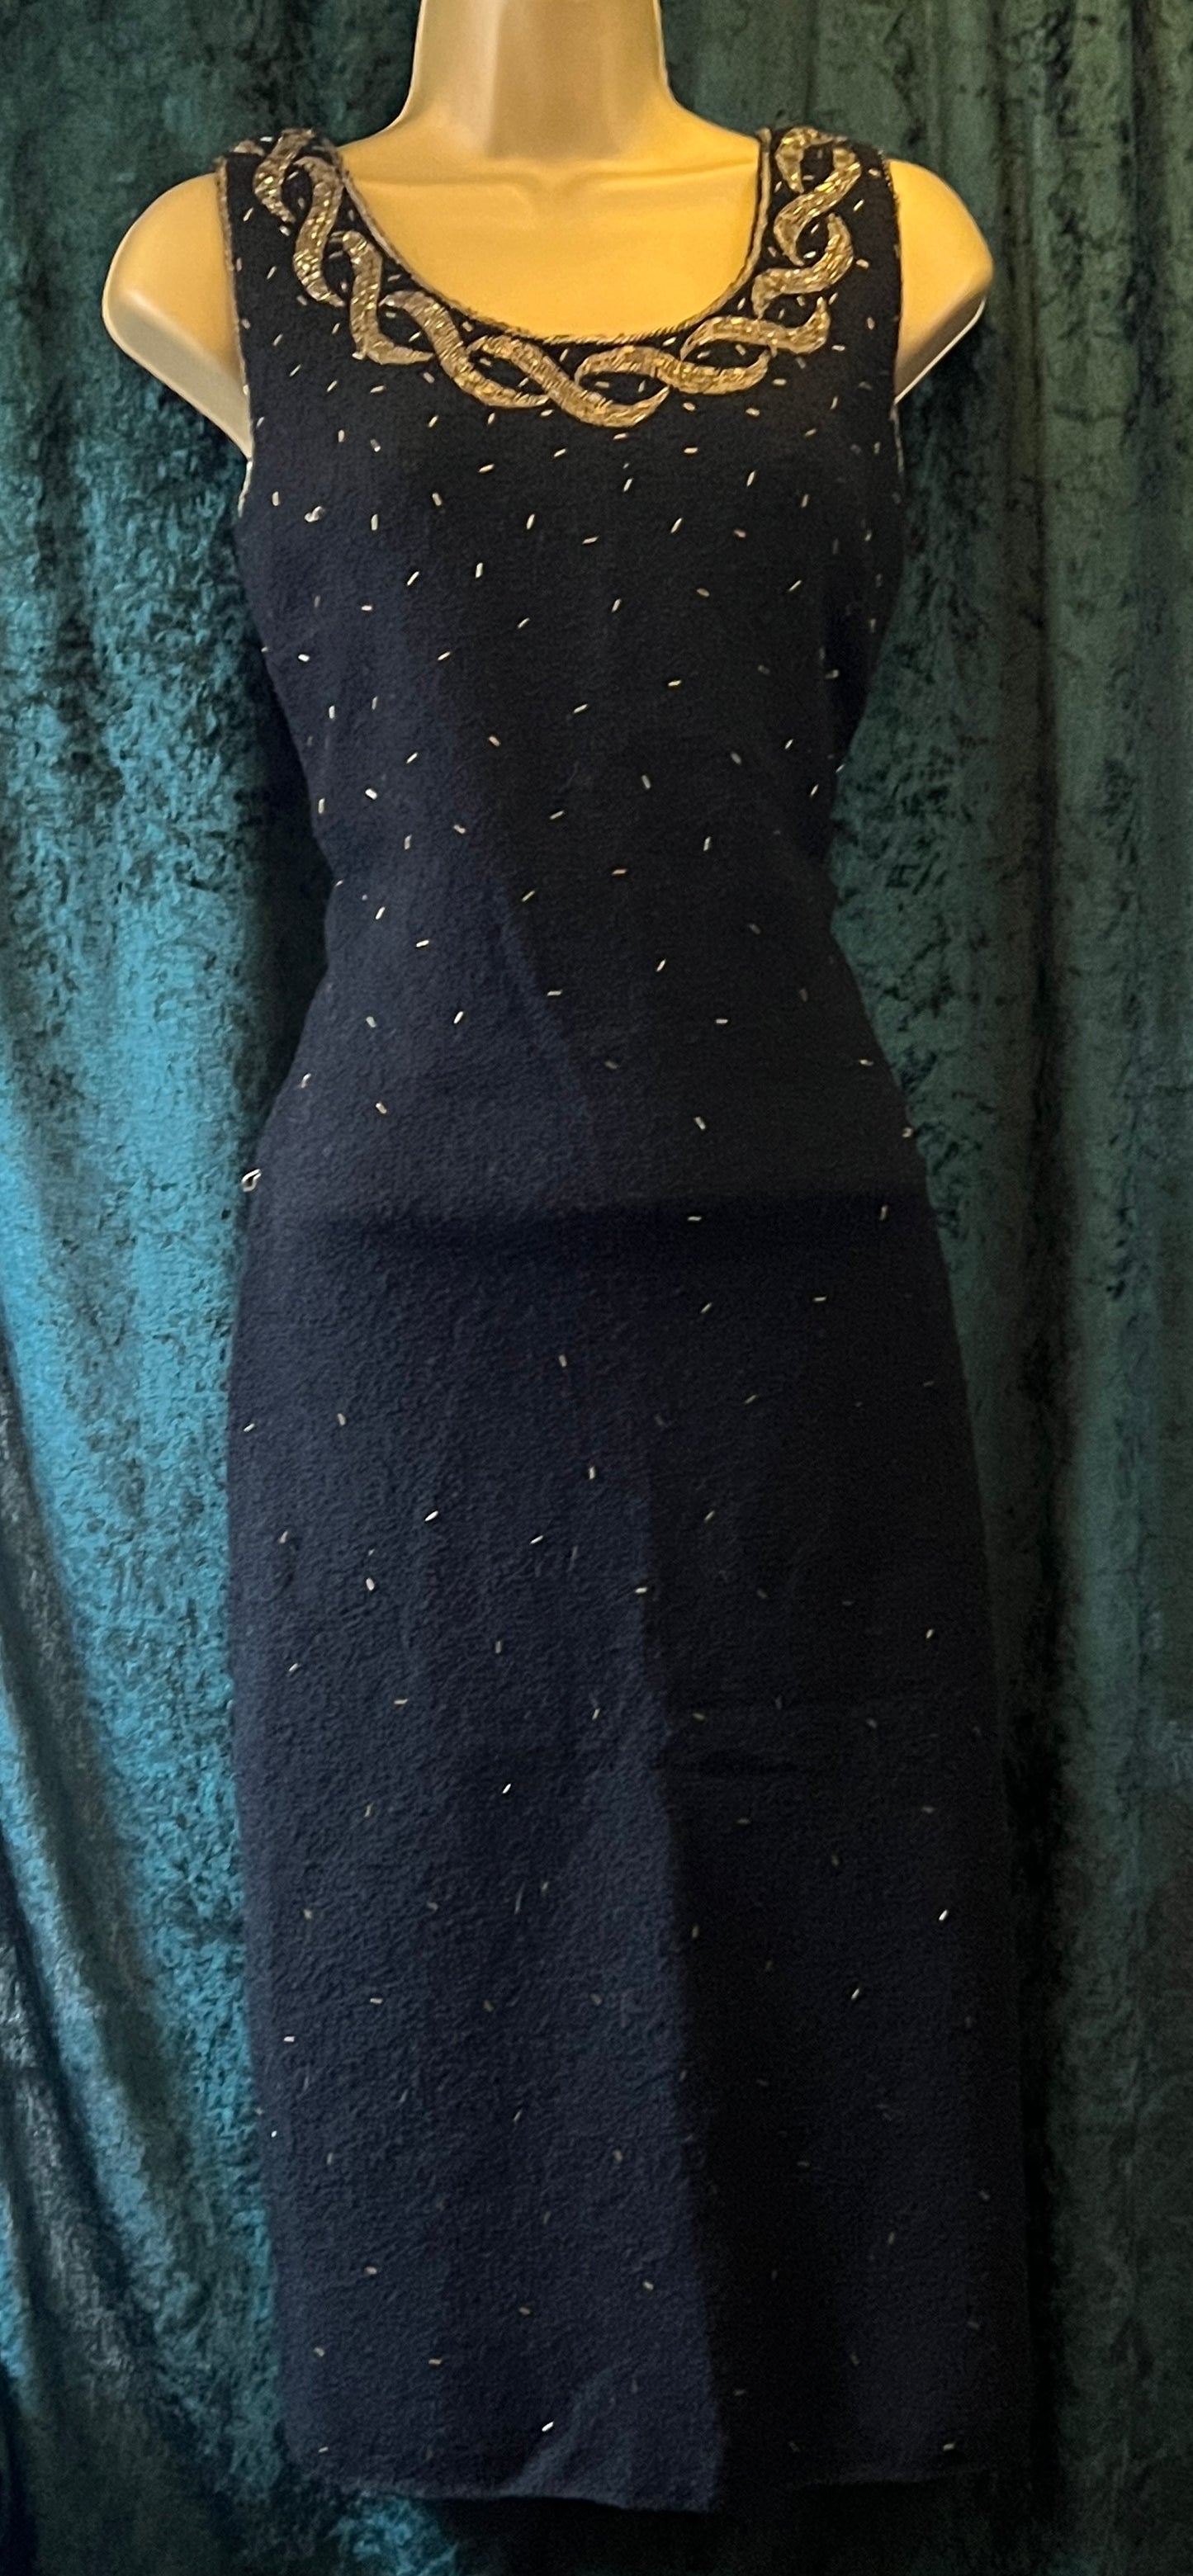 Vintage 50s Gene Shelley beaded black and gold knit wiggle cocktail dress